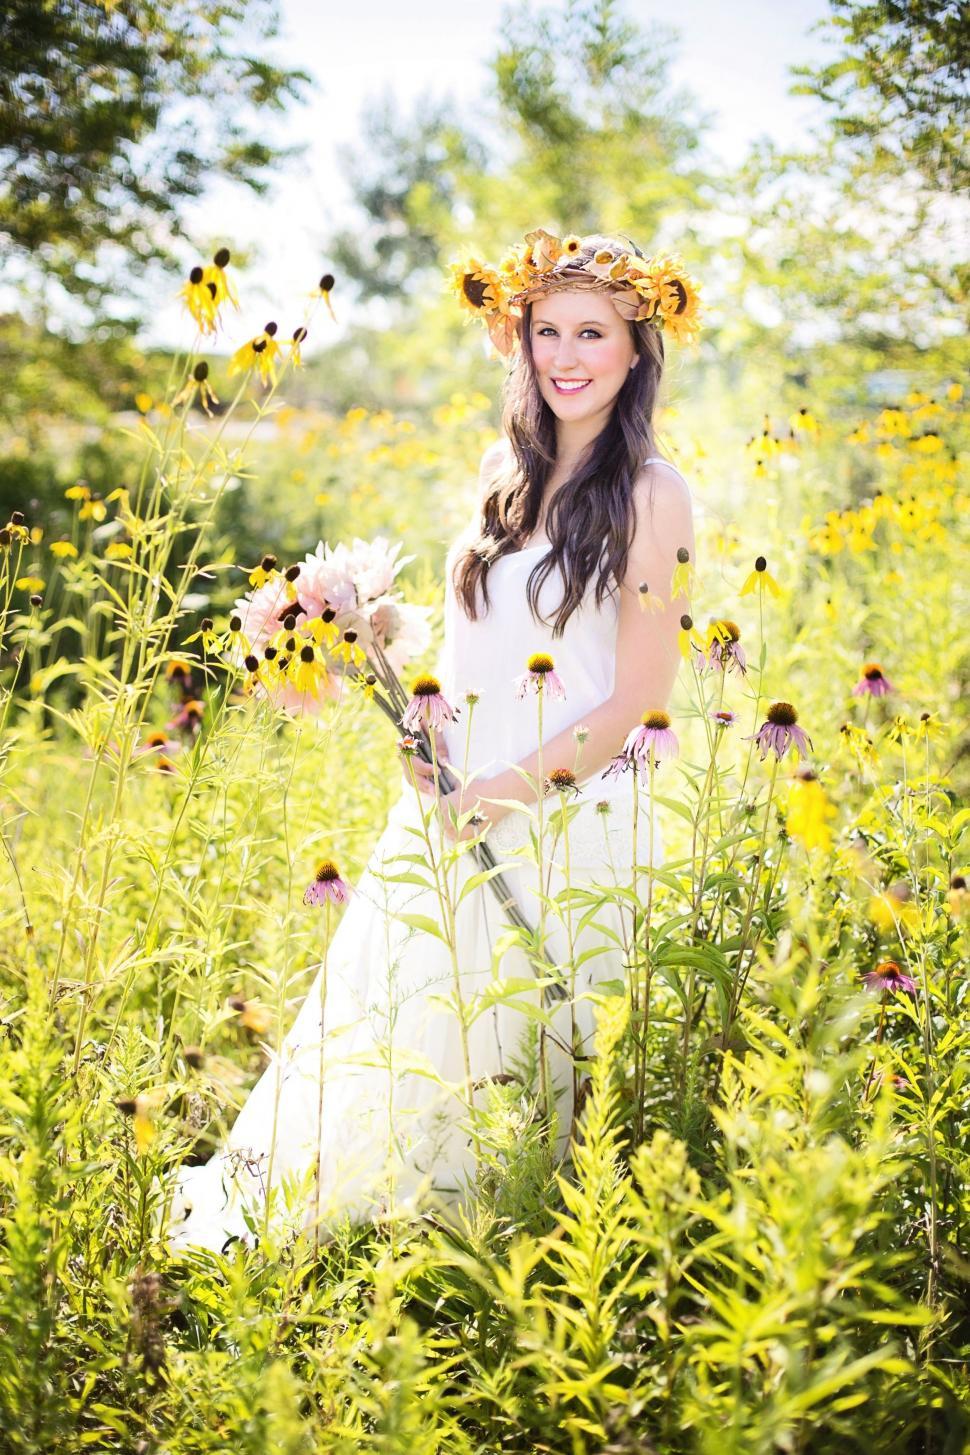 Free Image of Smiling Woman posing In sunflower crown - Looking at camera 